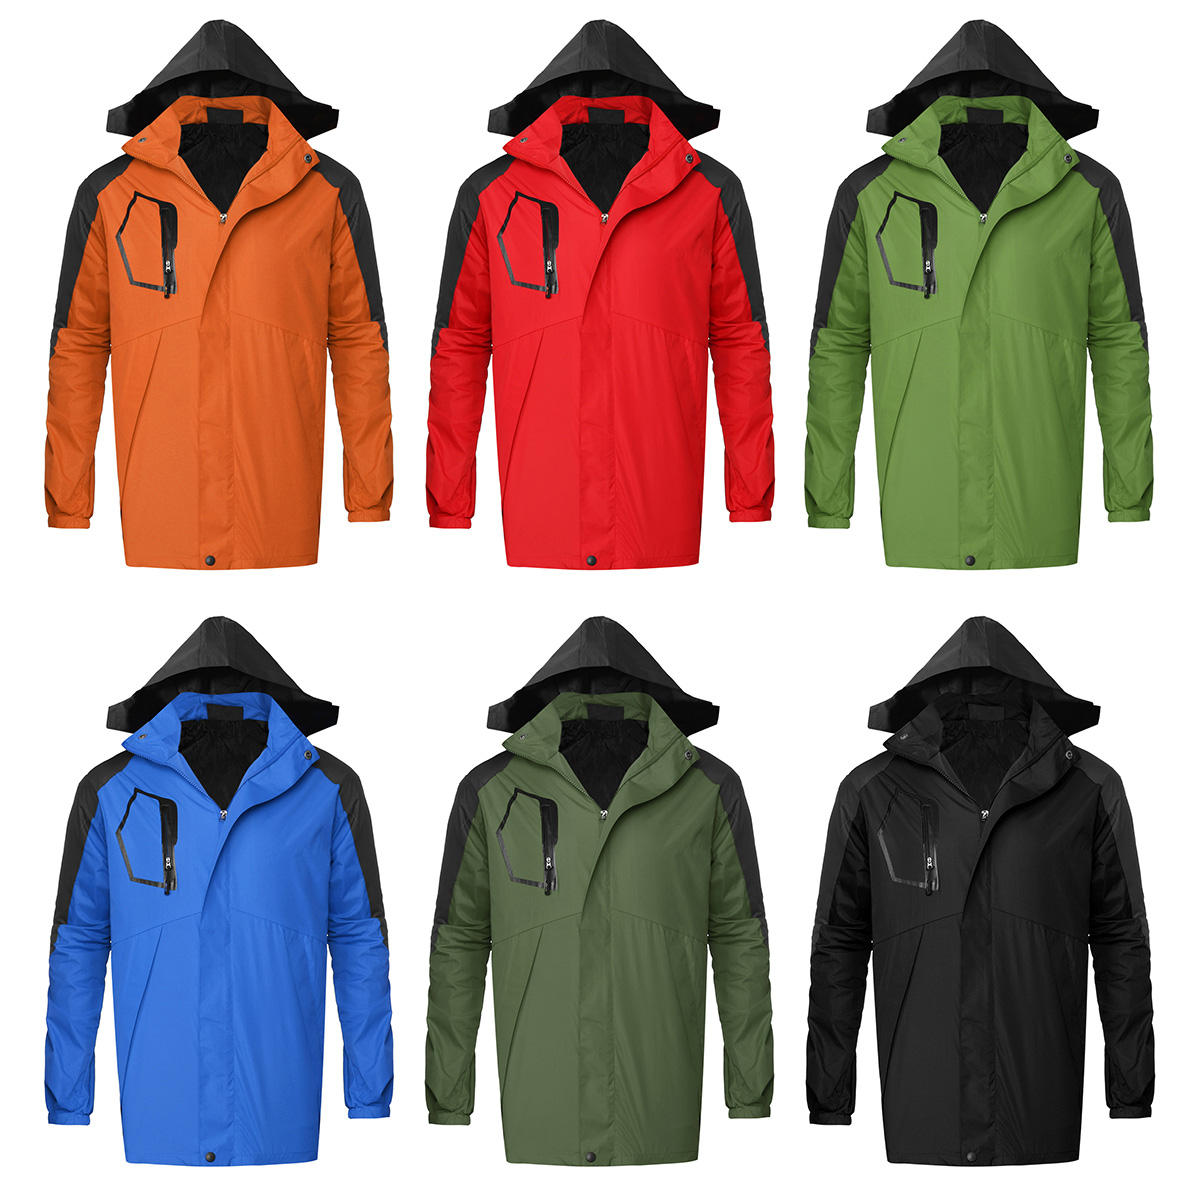 M-XXL Waterproof Windproof Coat Snow Winter Warm Jacket Hooded Outwear Outdoor Clothes For Hiking Fishing